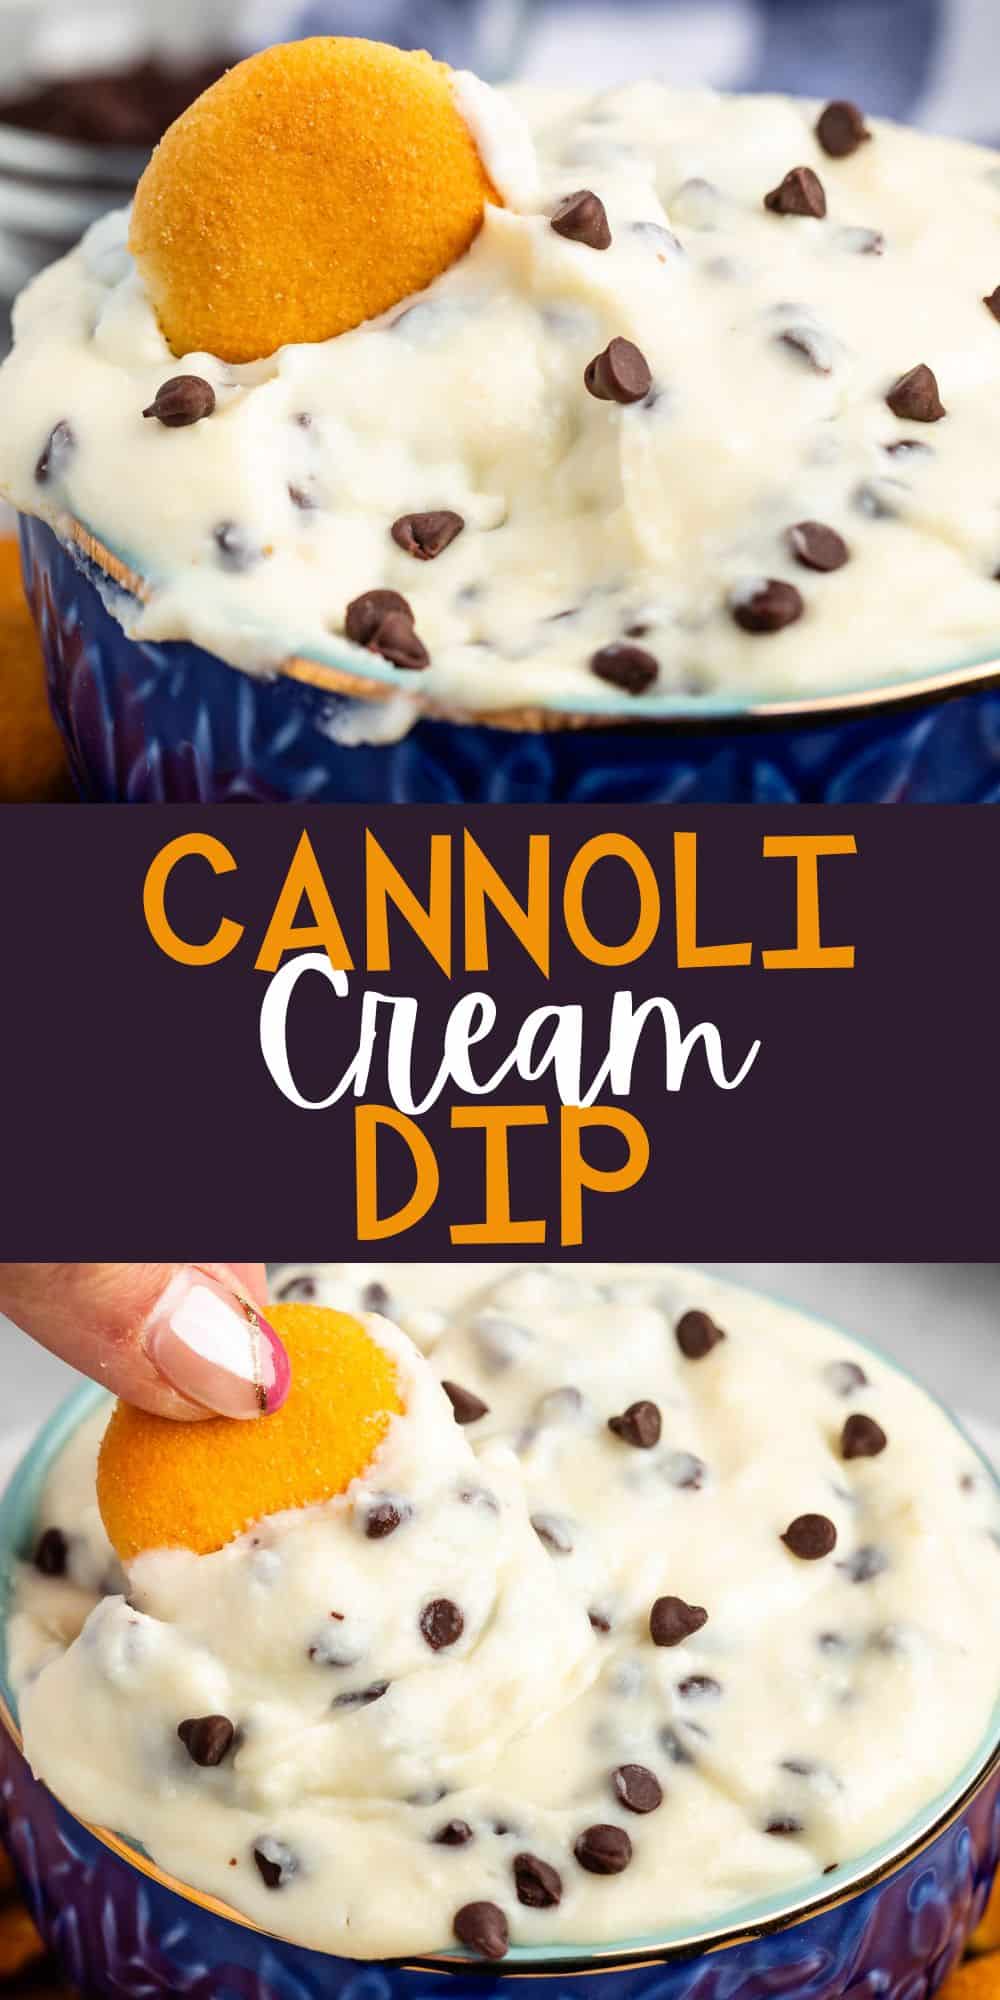 two photos of cannoli dip in a blue bowl with orange cookie wafers next to the bowl with words on the image.